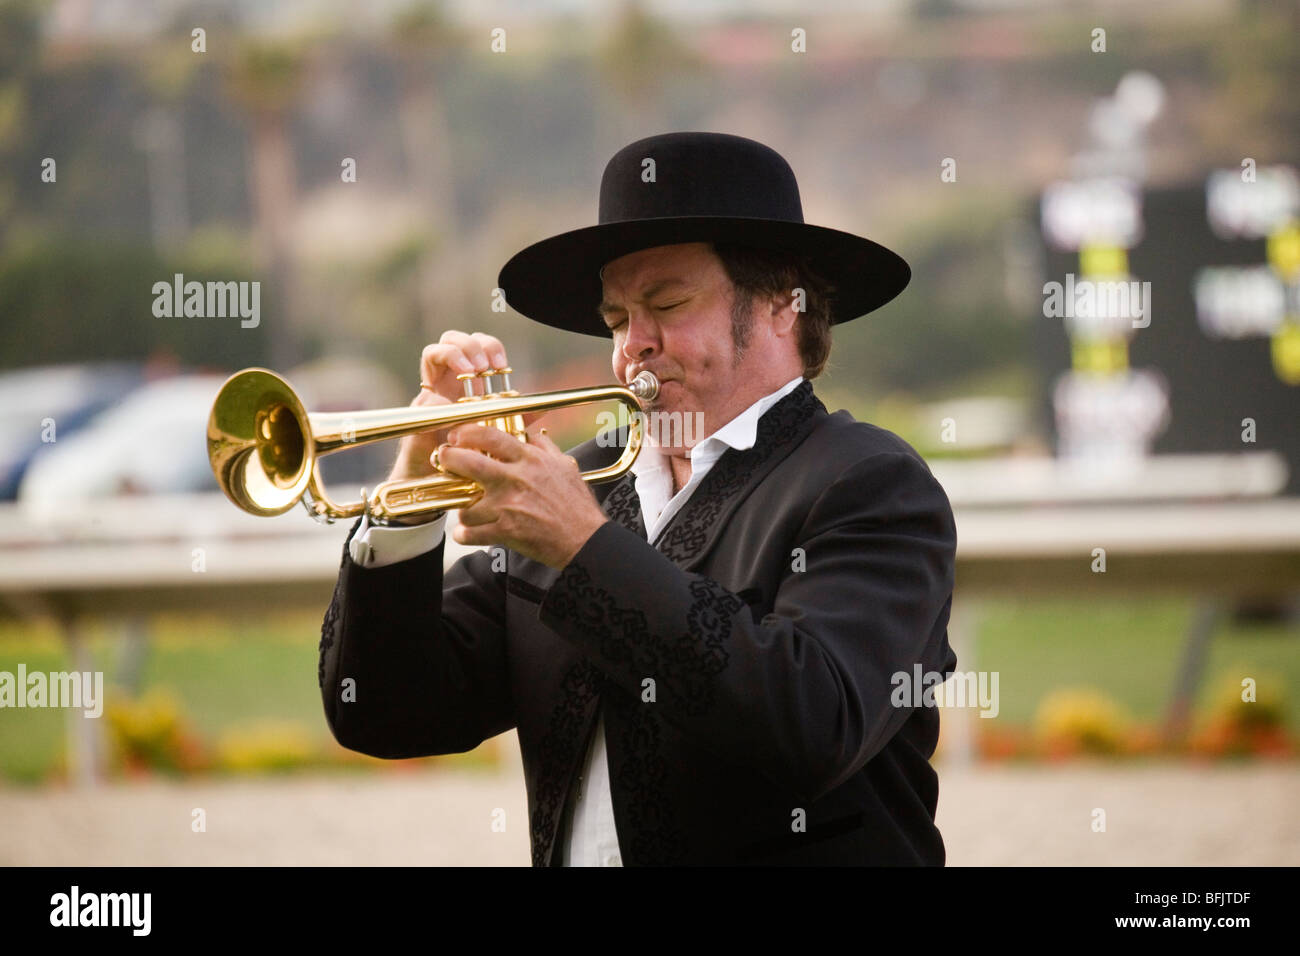 A man plays the call to post on his bugle, at a horse track at the Del Mar Fairgrounds in southern California. Stock Photo